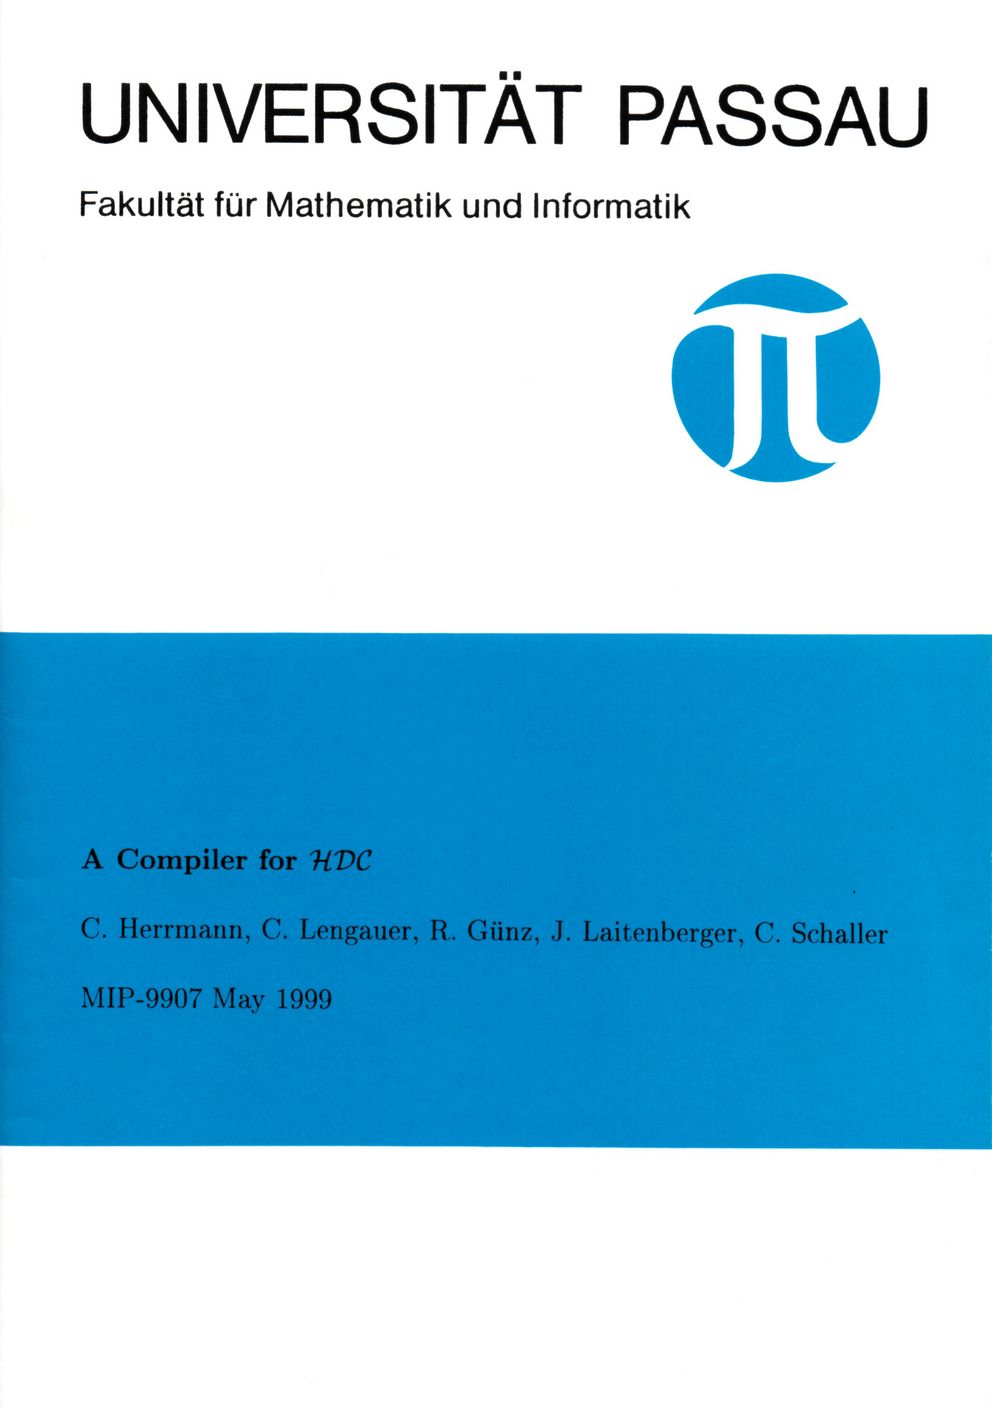 Technical report of the Faculty of Computer Science and Mathematics